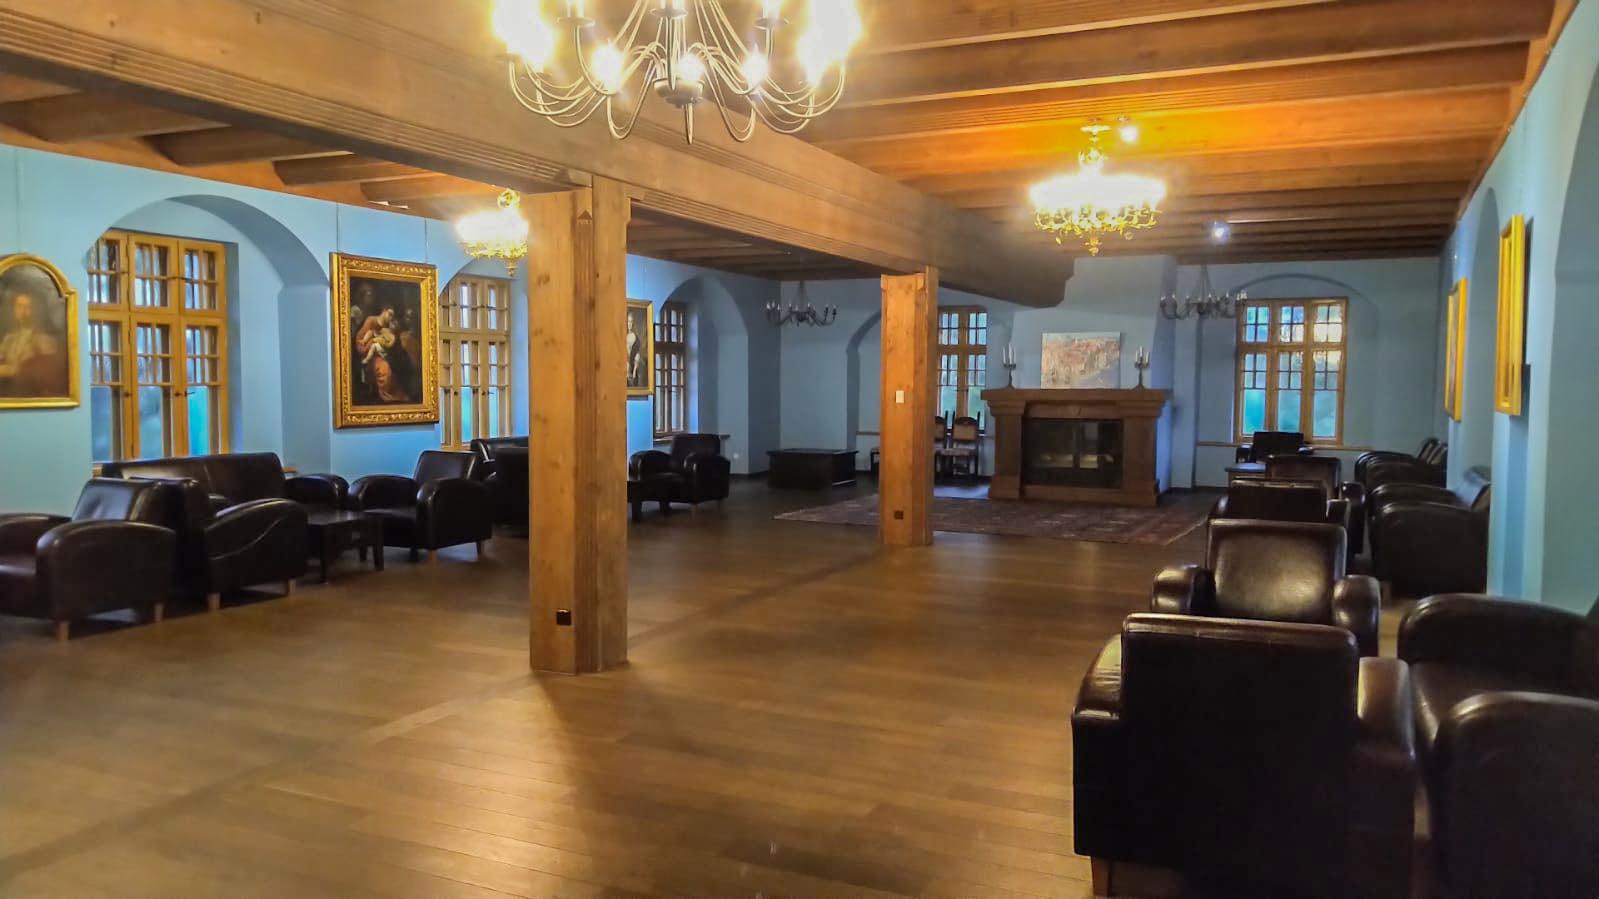 Historic, operating hotel near Szczecin with a unique history